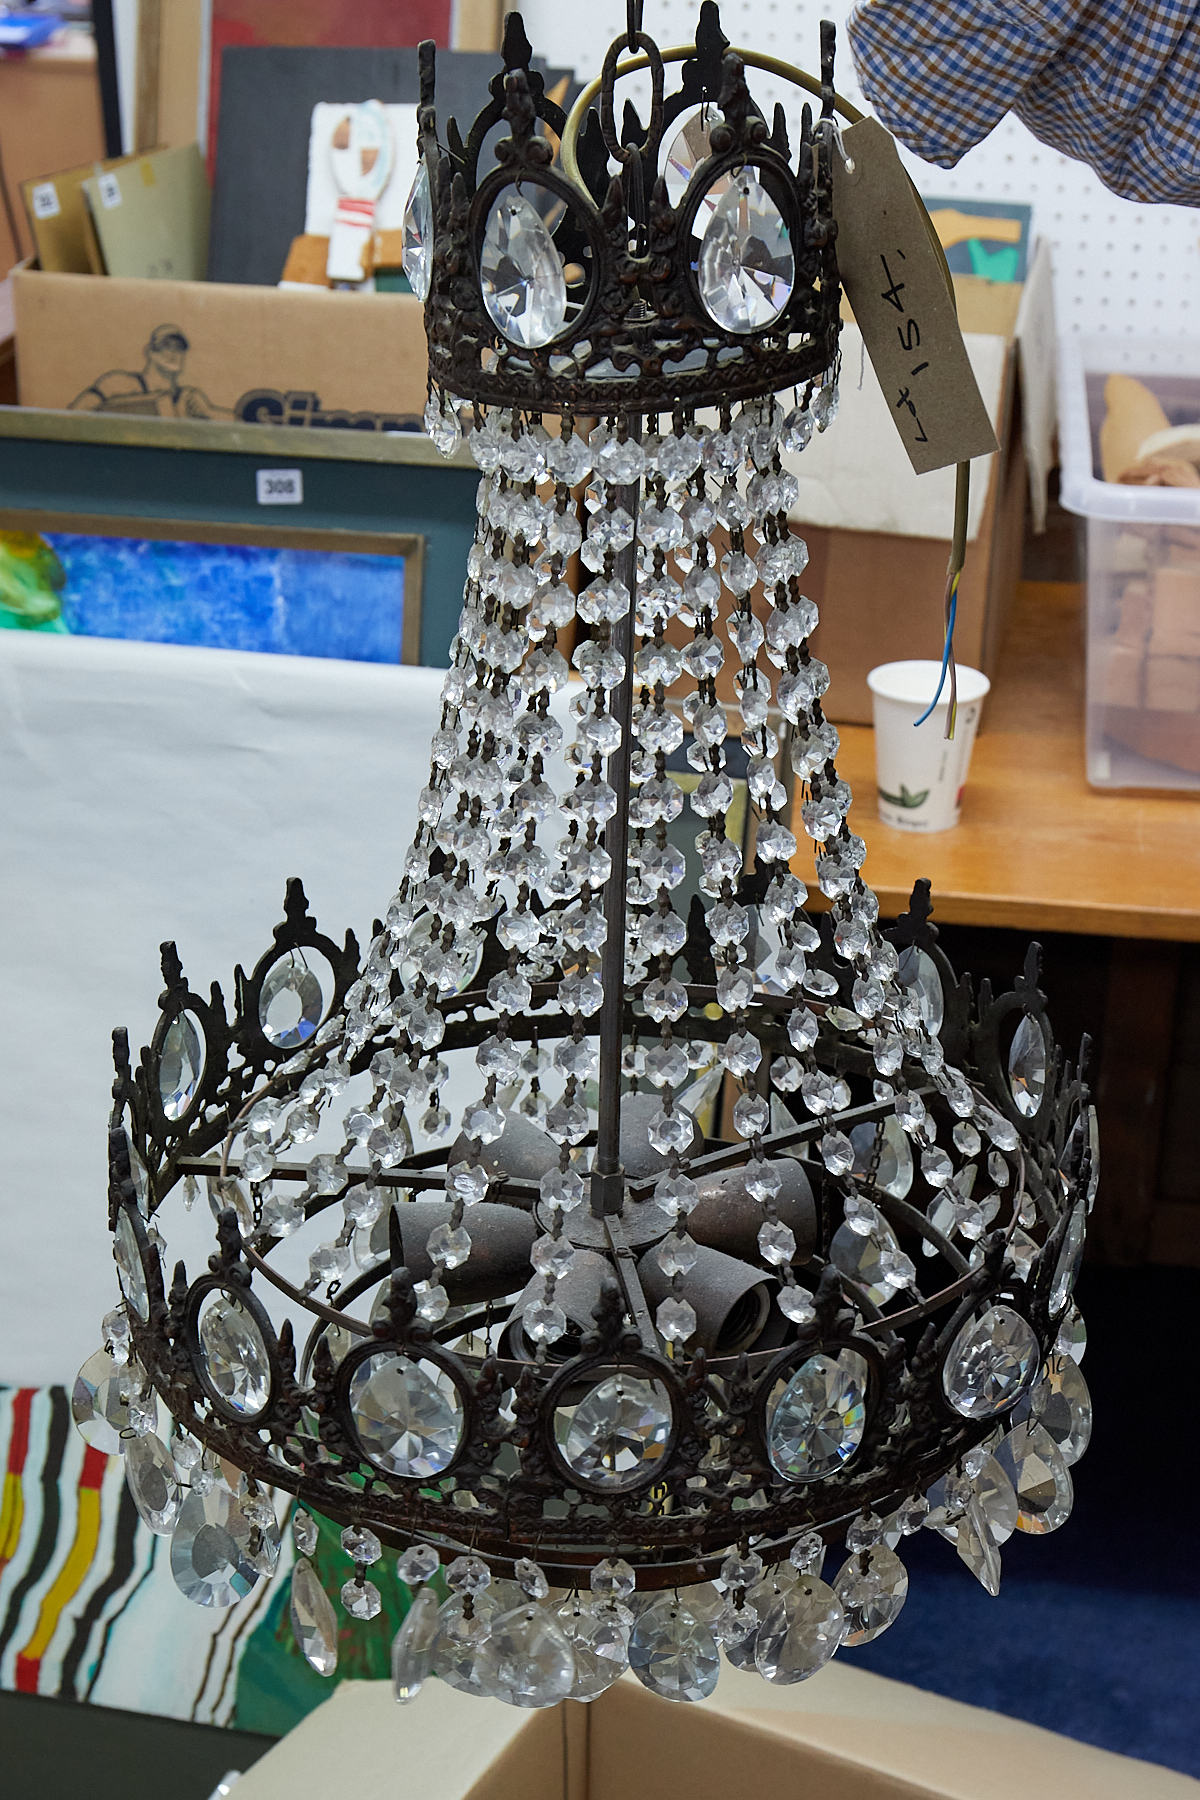 Early 20th century hanging light pendant with glass drops, approx 70cm.